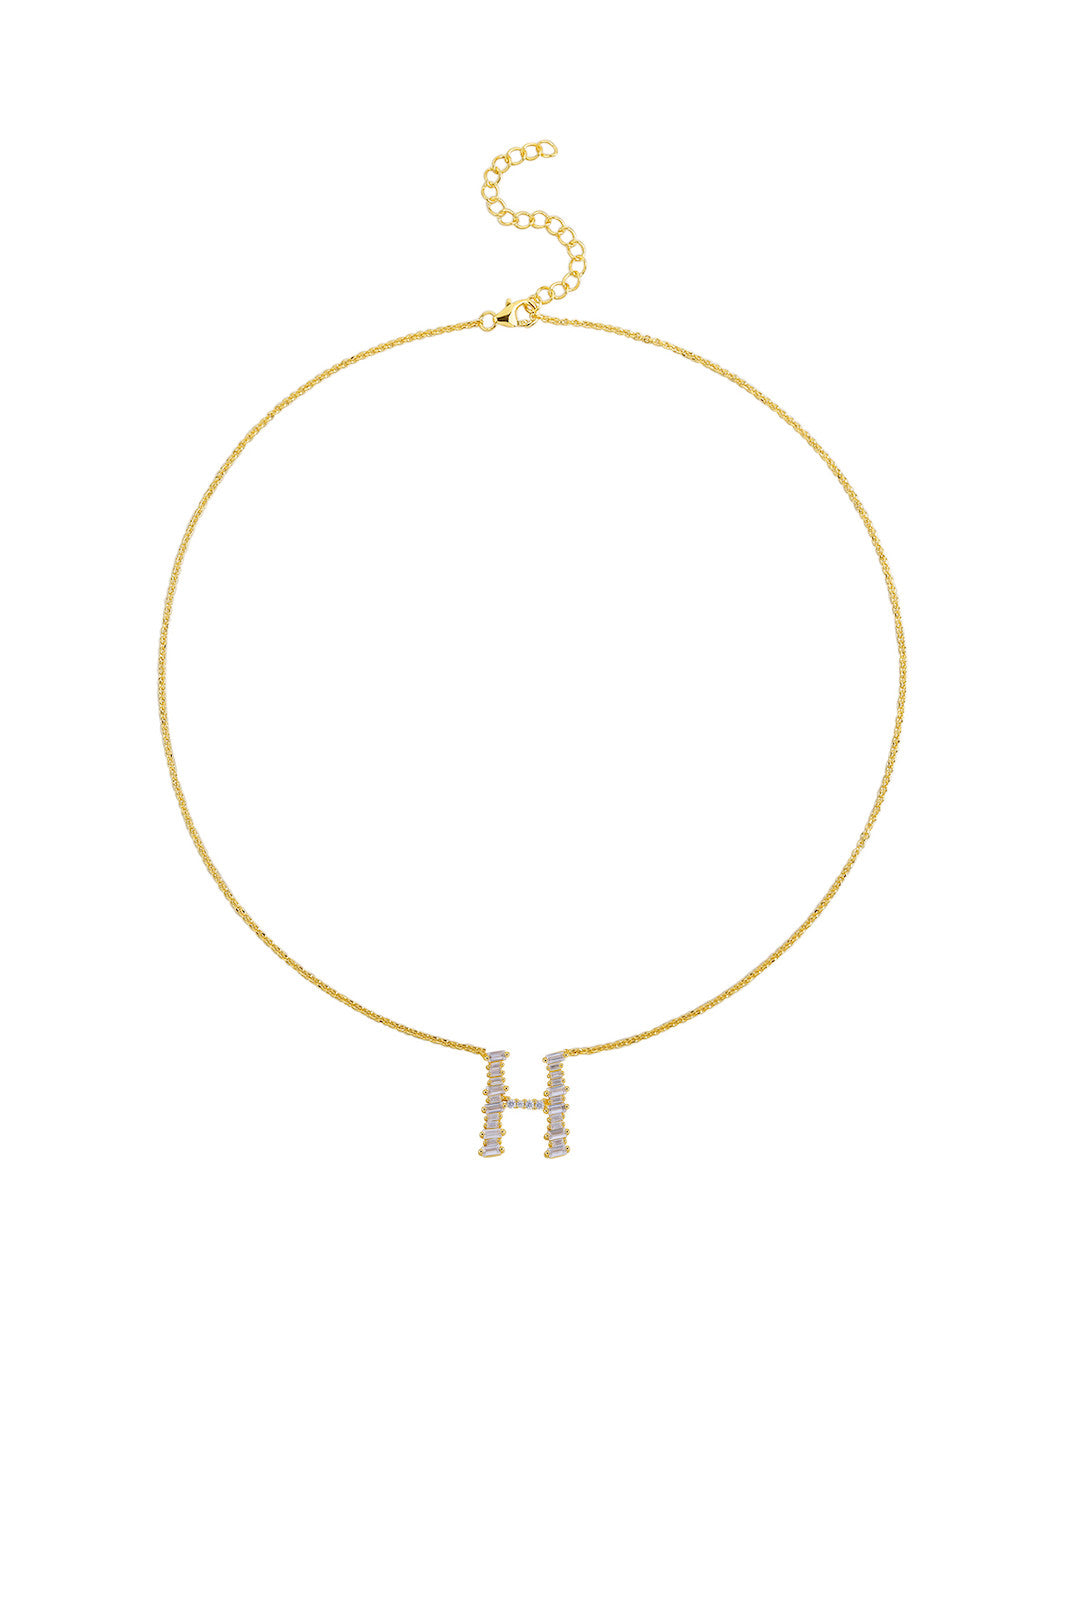 Gold Plated Sterling Silver Initial Necklace - Letter H Detail